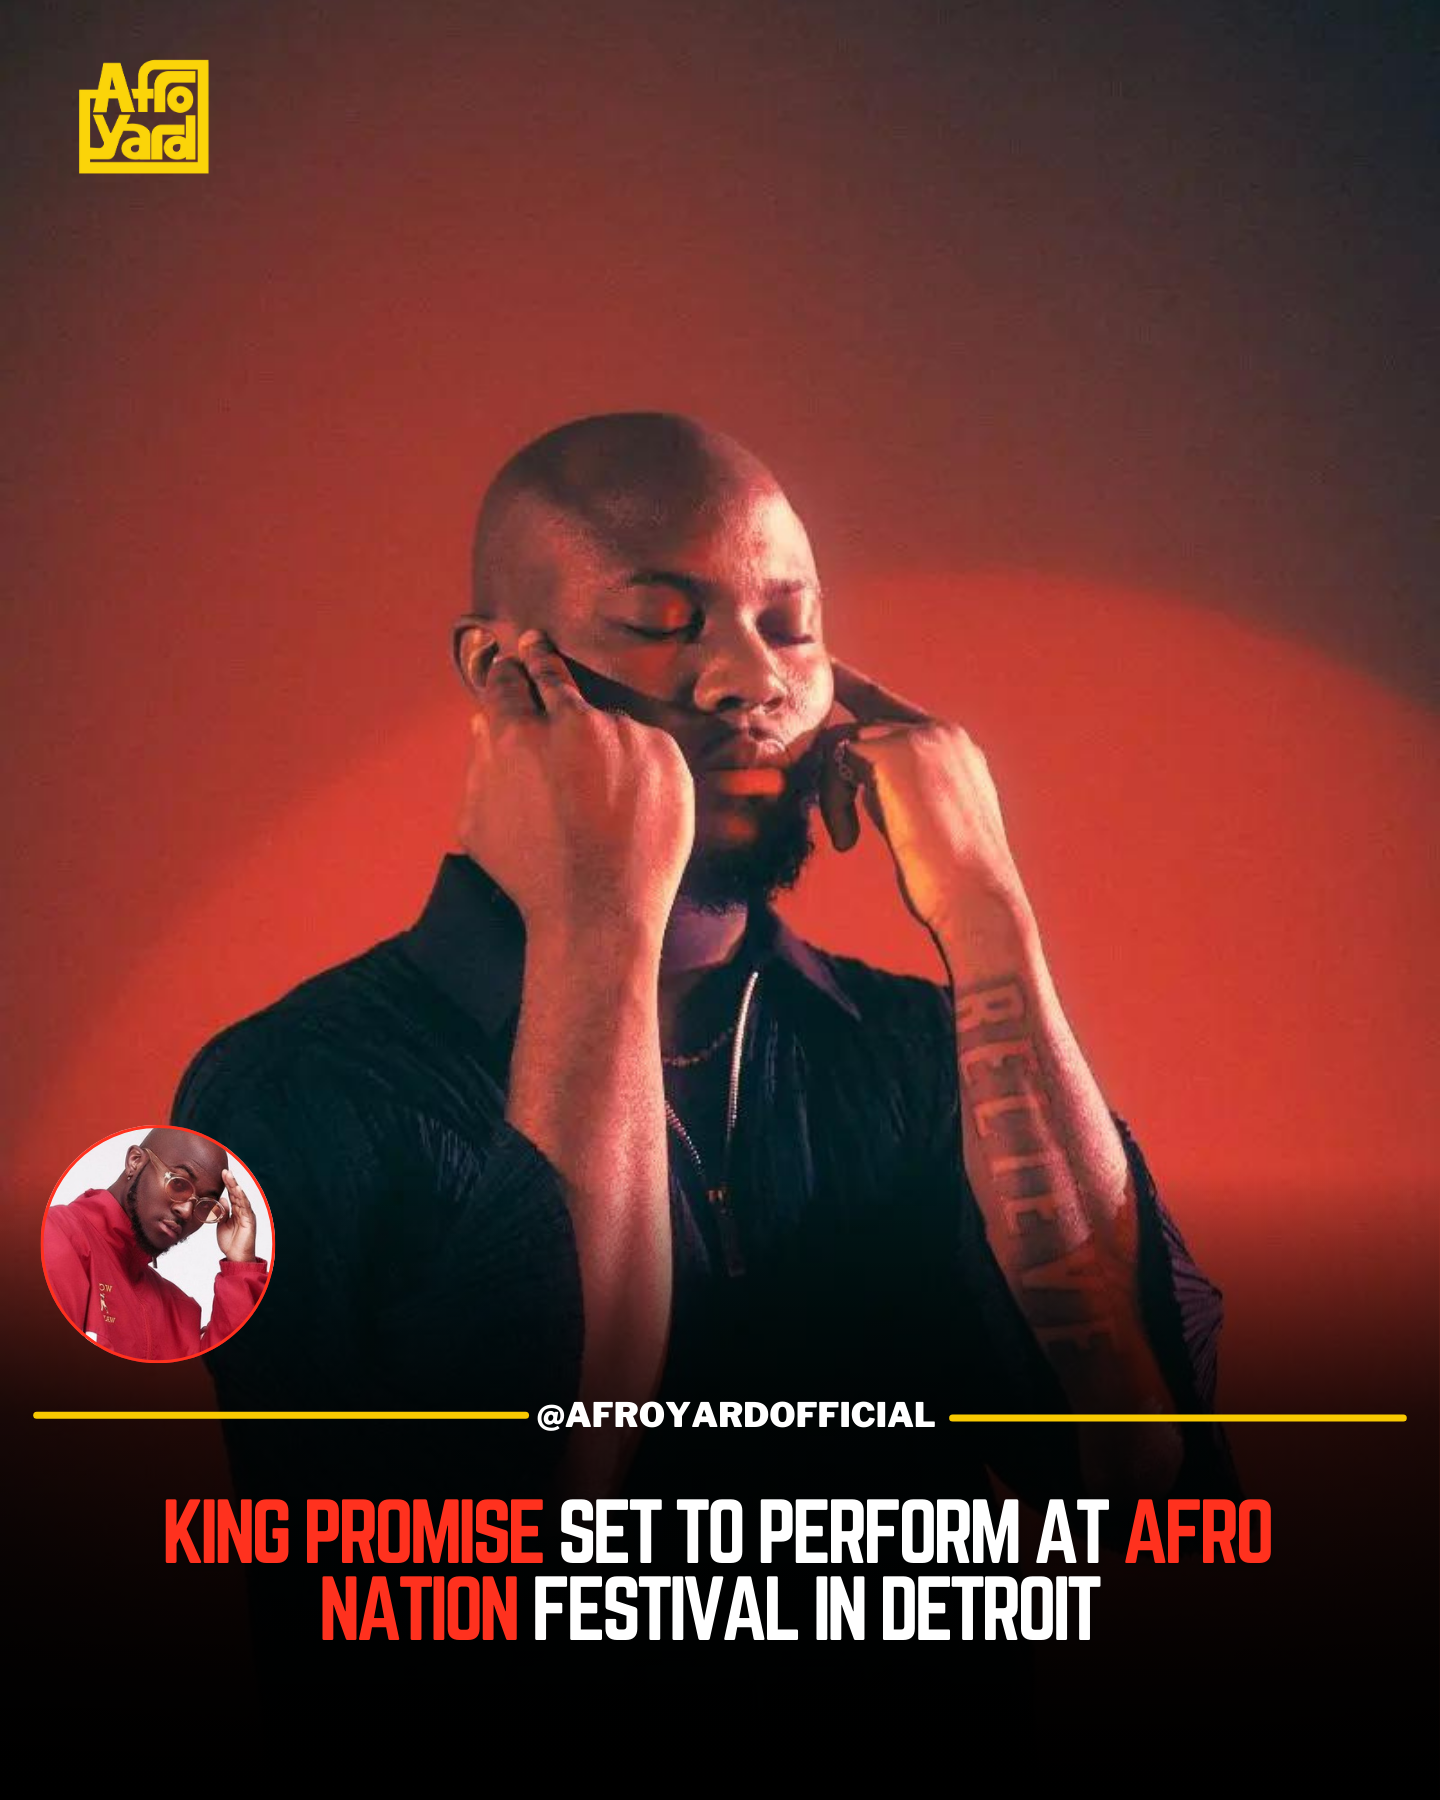 King Promise Set to Perform at Afro Nation Festival in Detroit